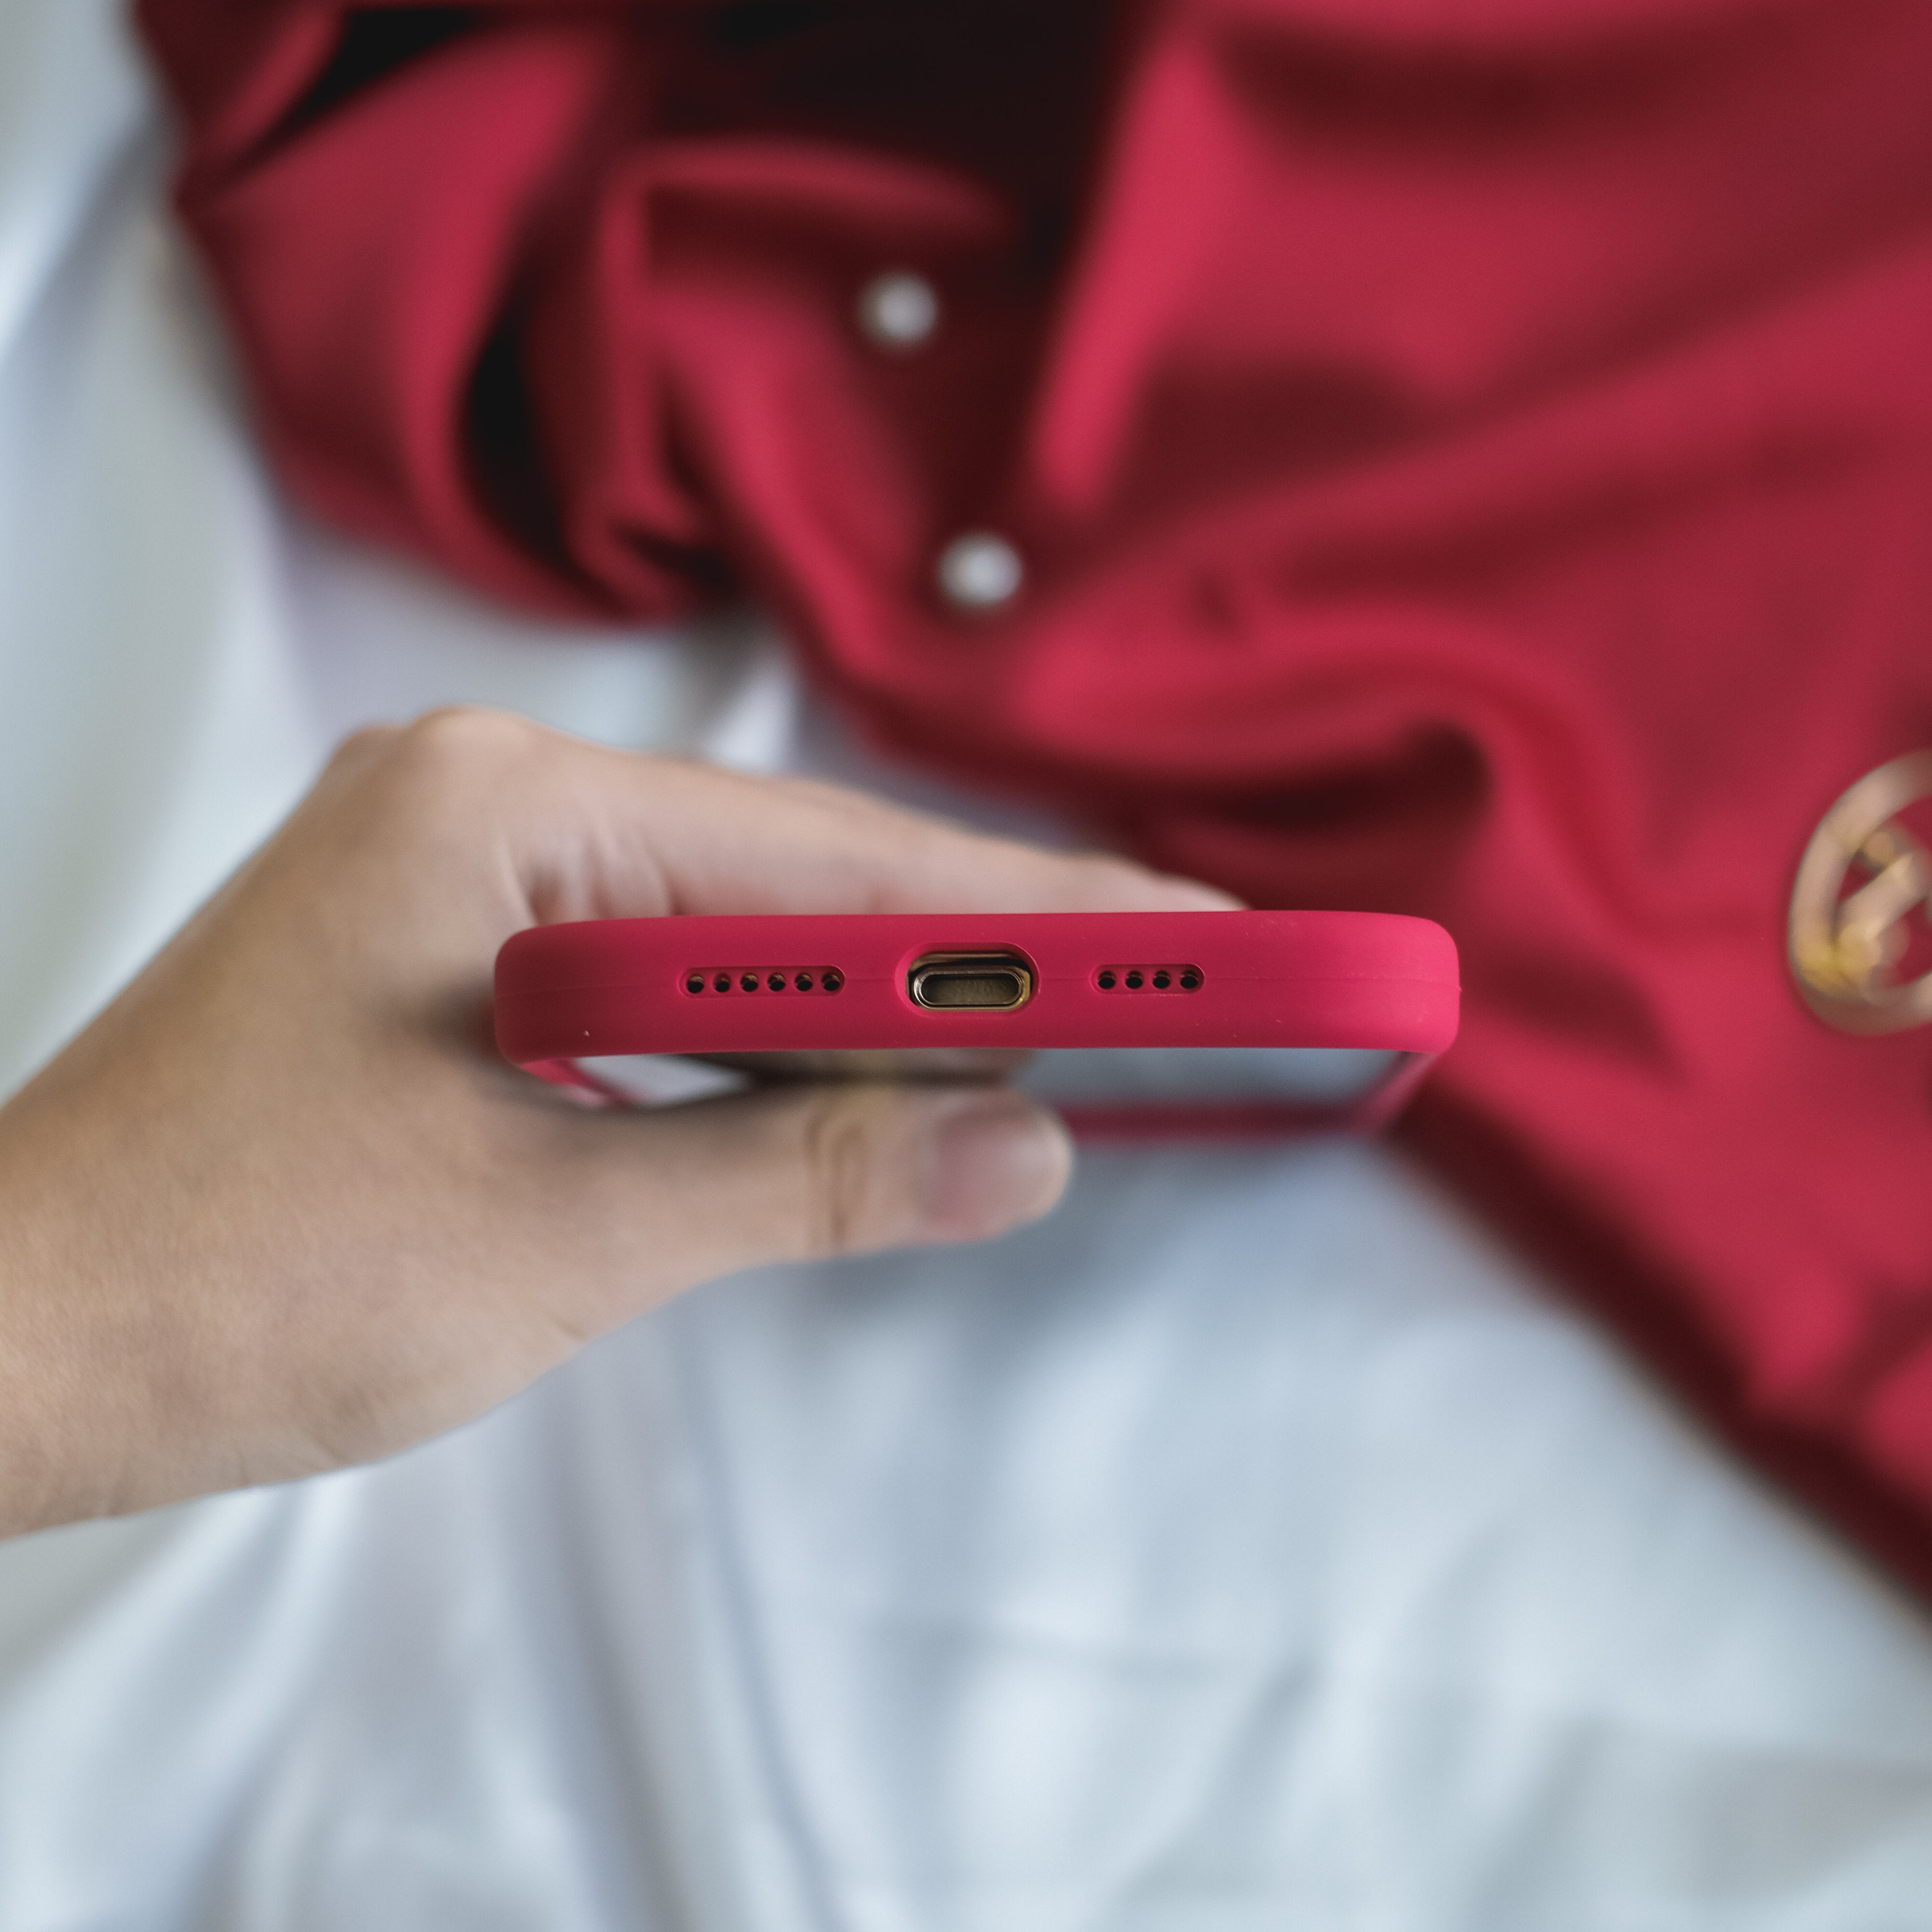 Rose Red Silicone Case